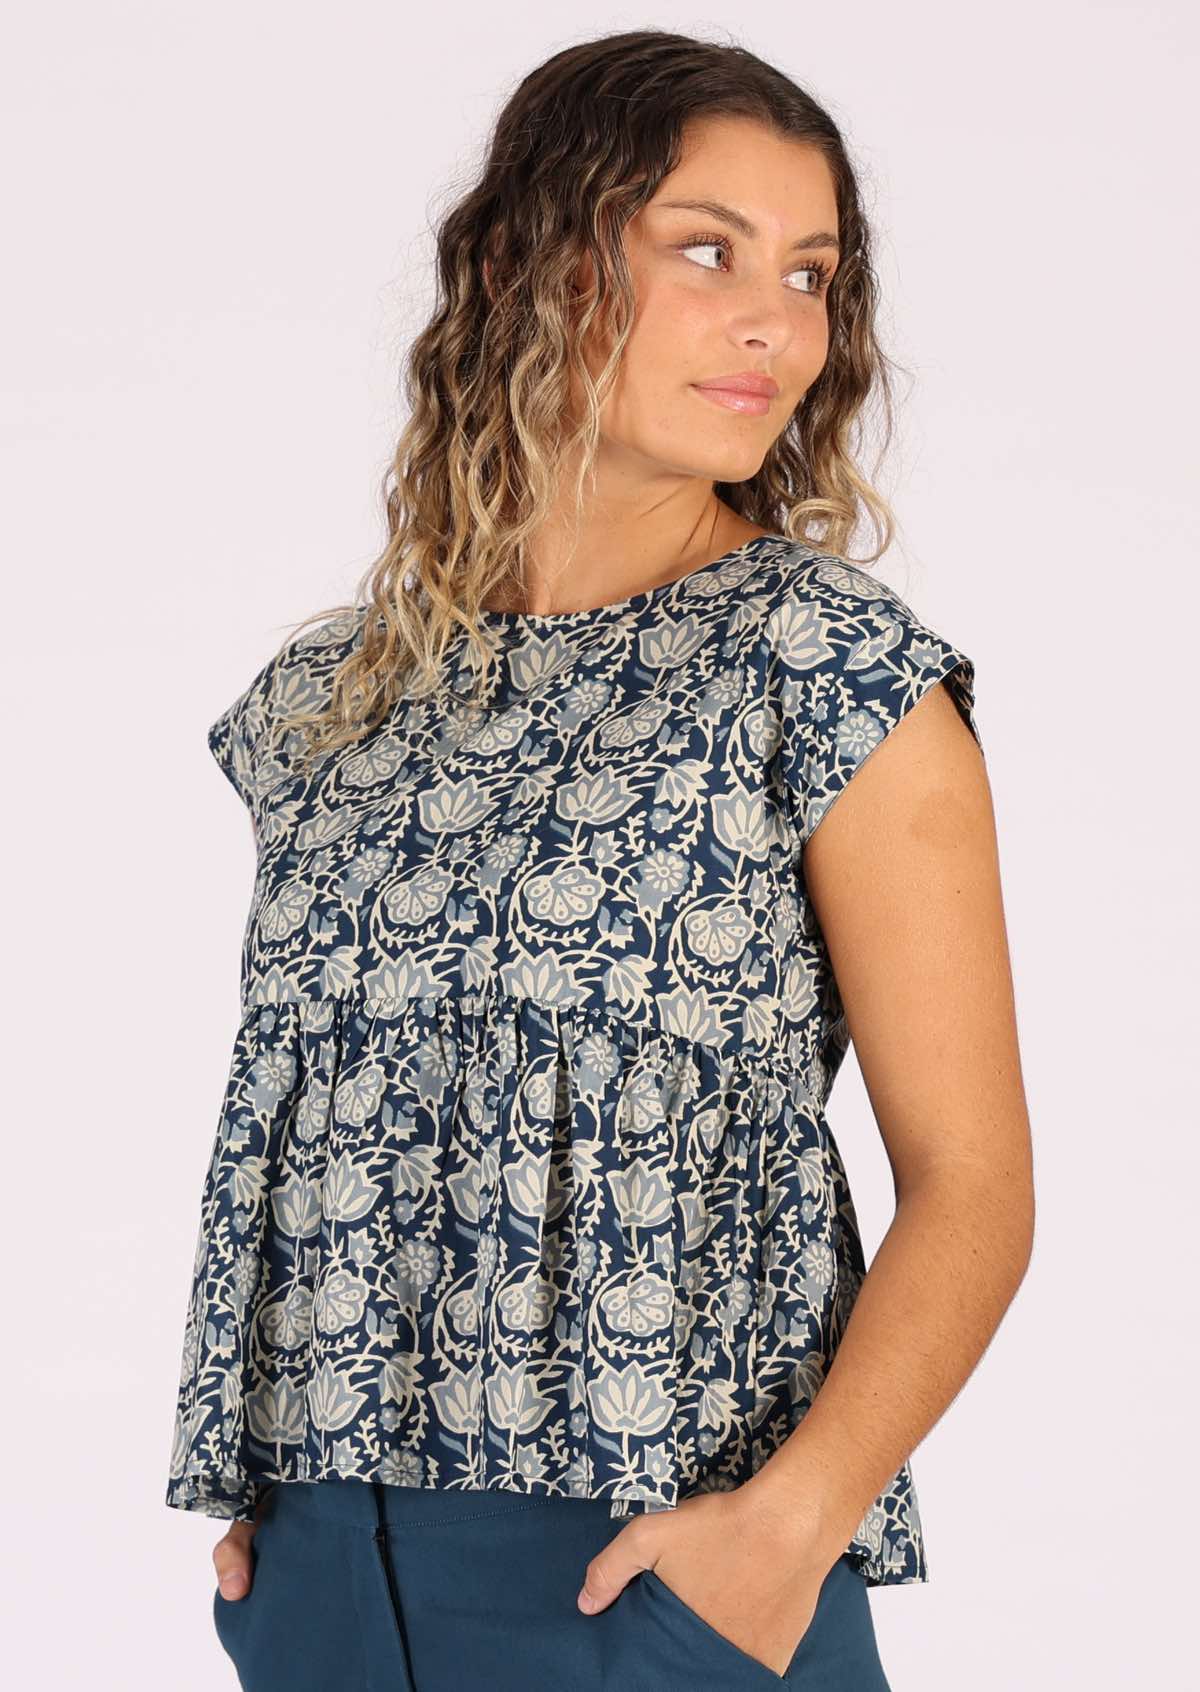 Lightweight cotton relaxed fit top with high round neckline